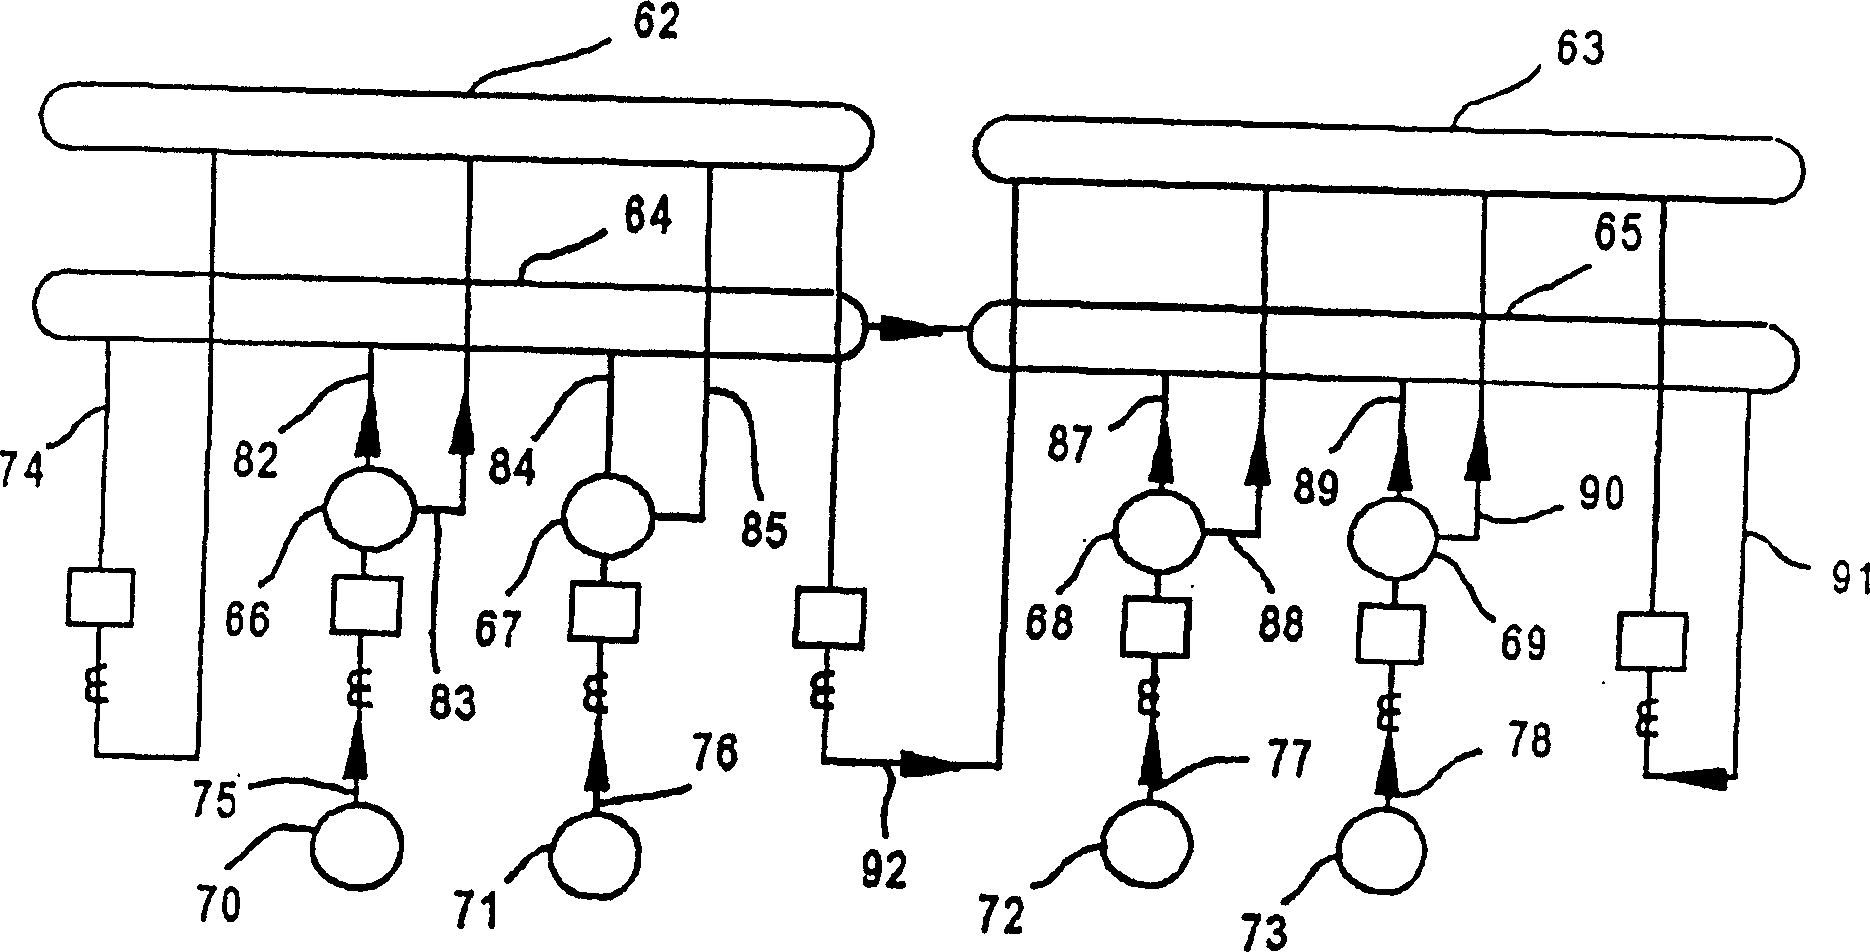 Protection zone selection system in relay based on microprocessor of electric power system